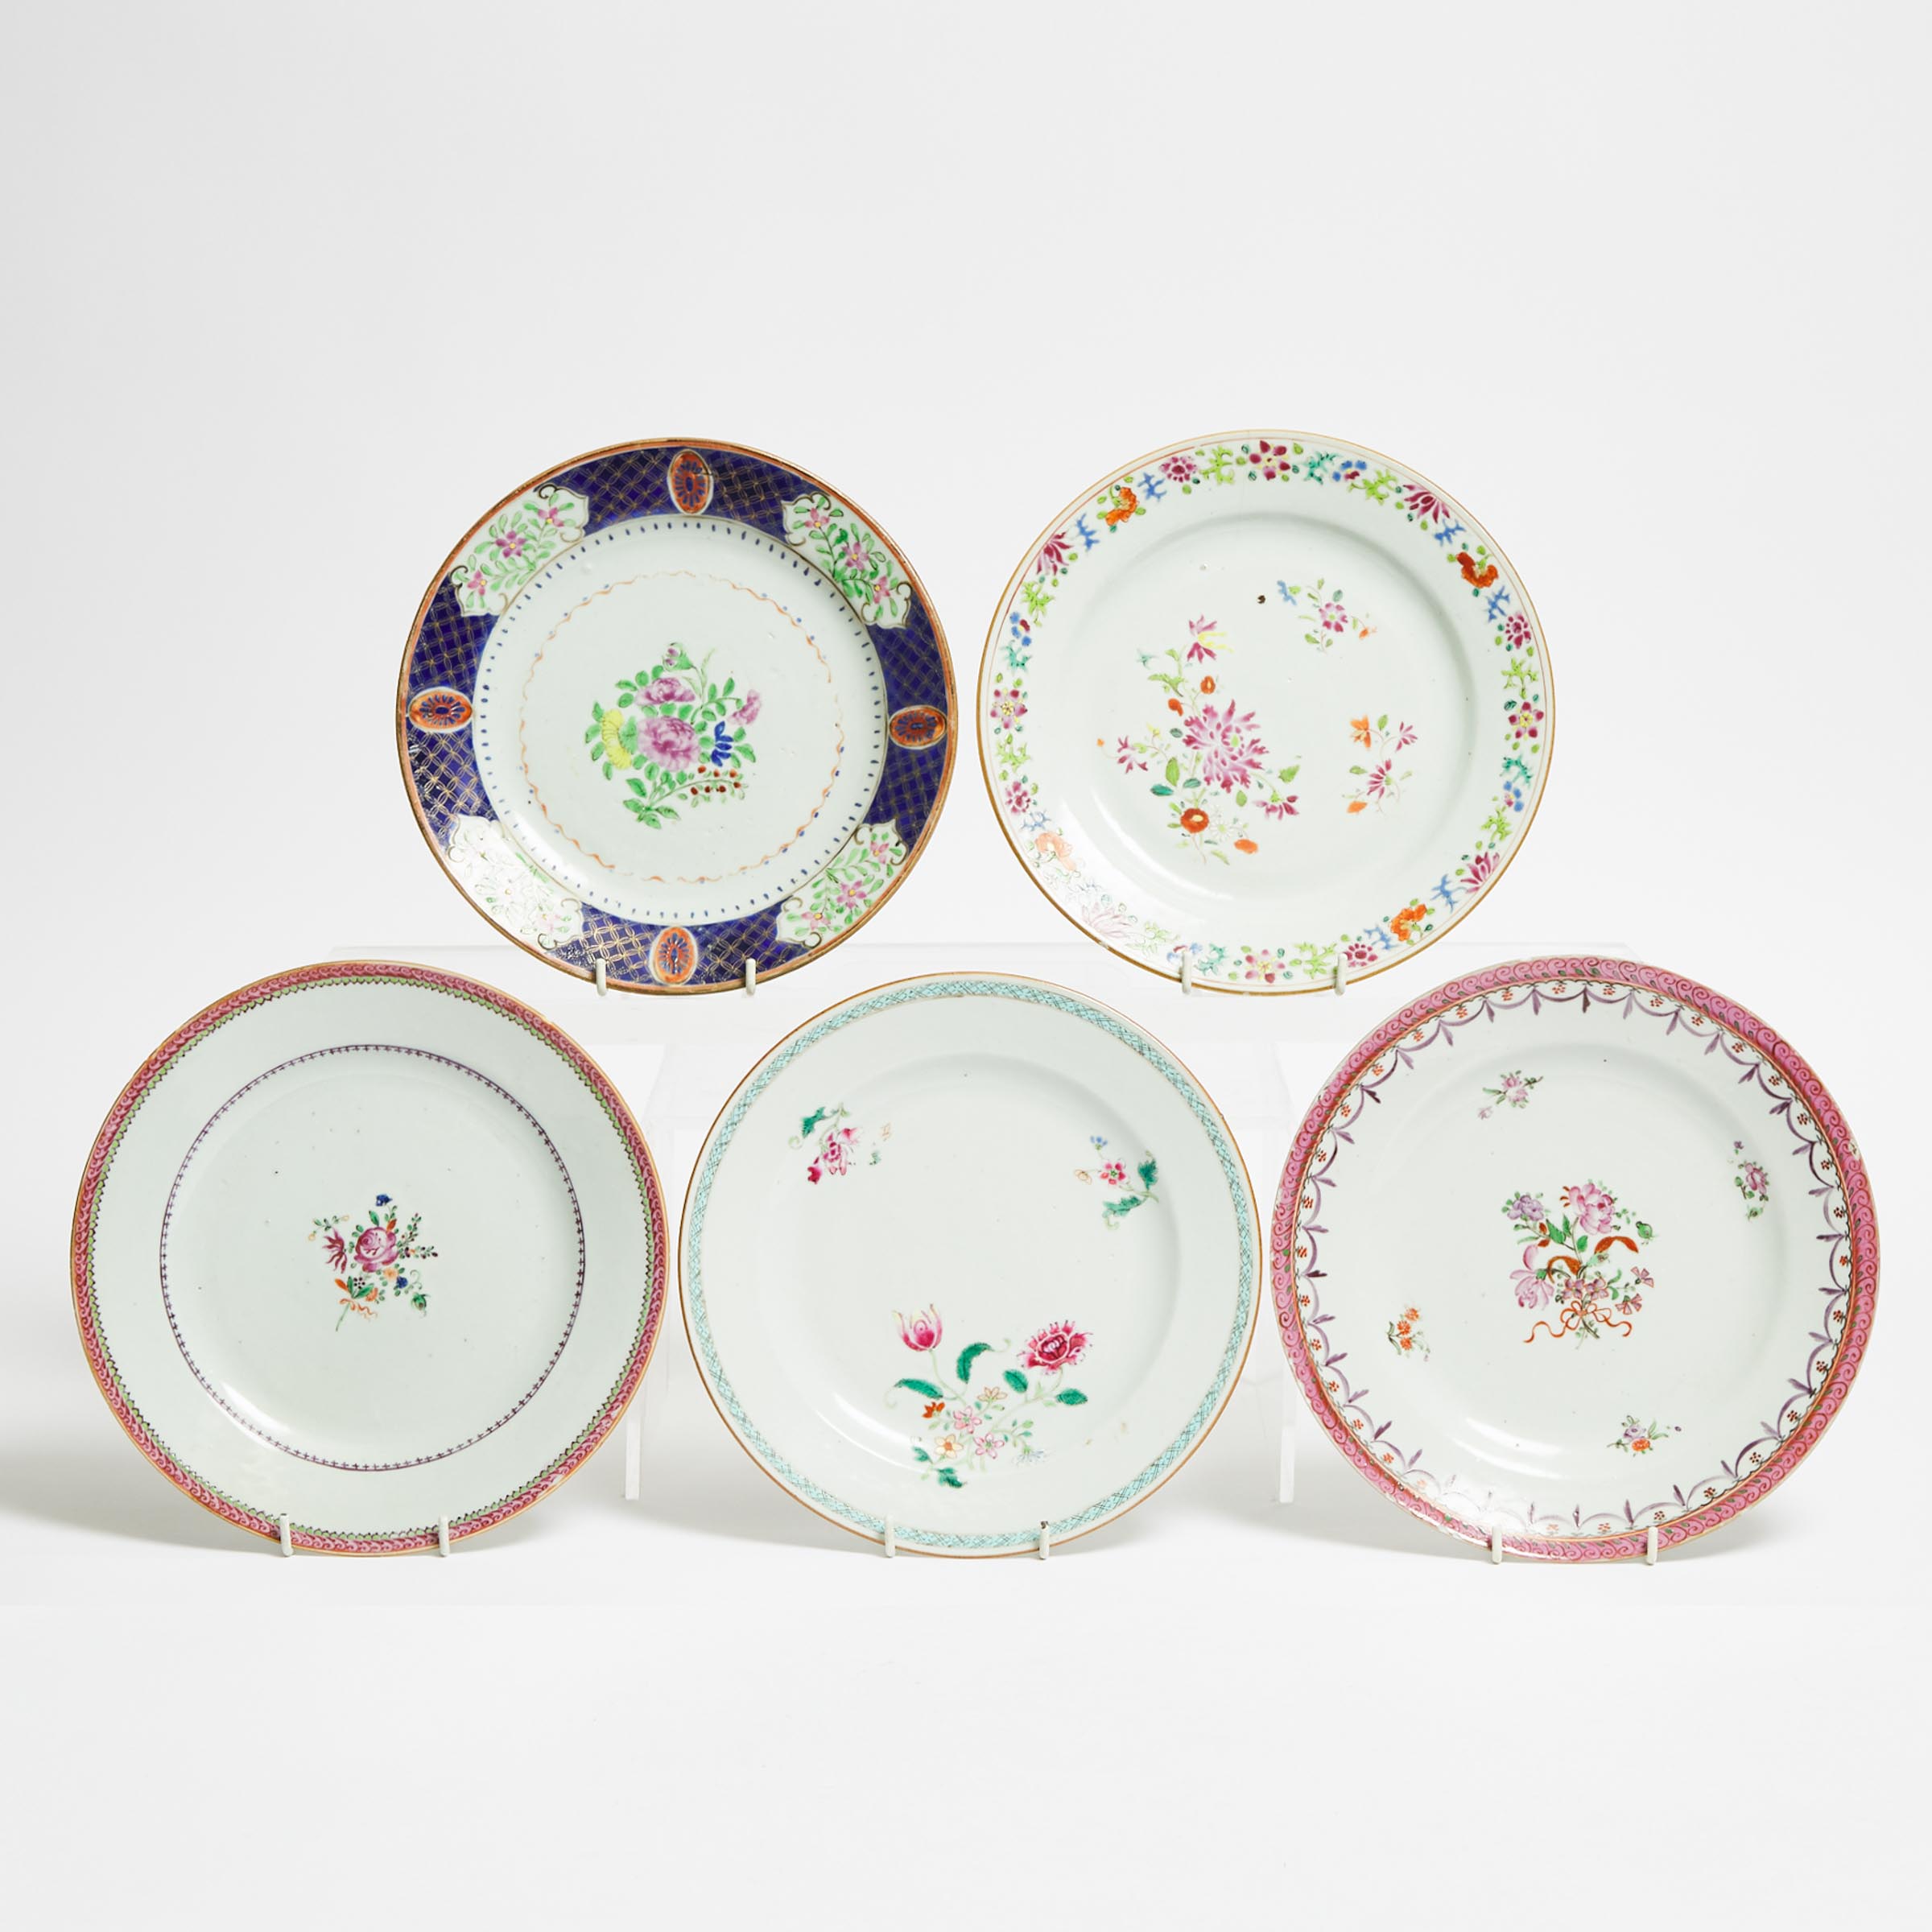 A Group of Five Chinese Export Famille Rose Dishes, Qianlong Period, 18th Century